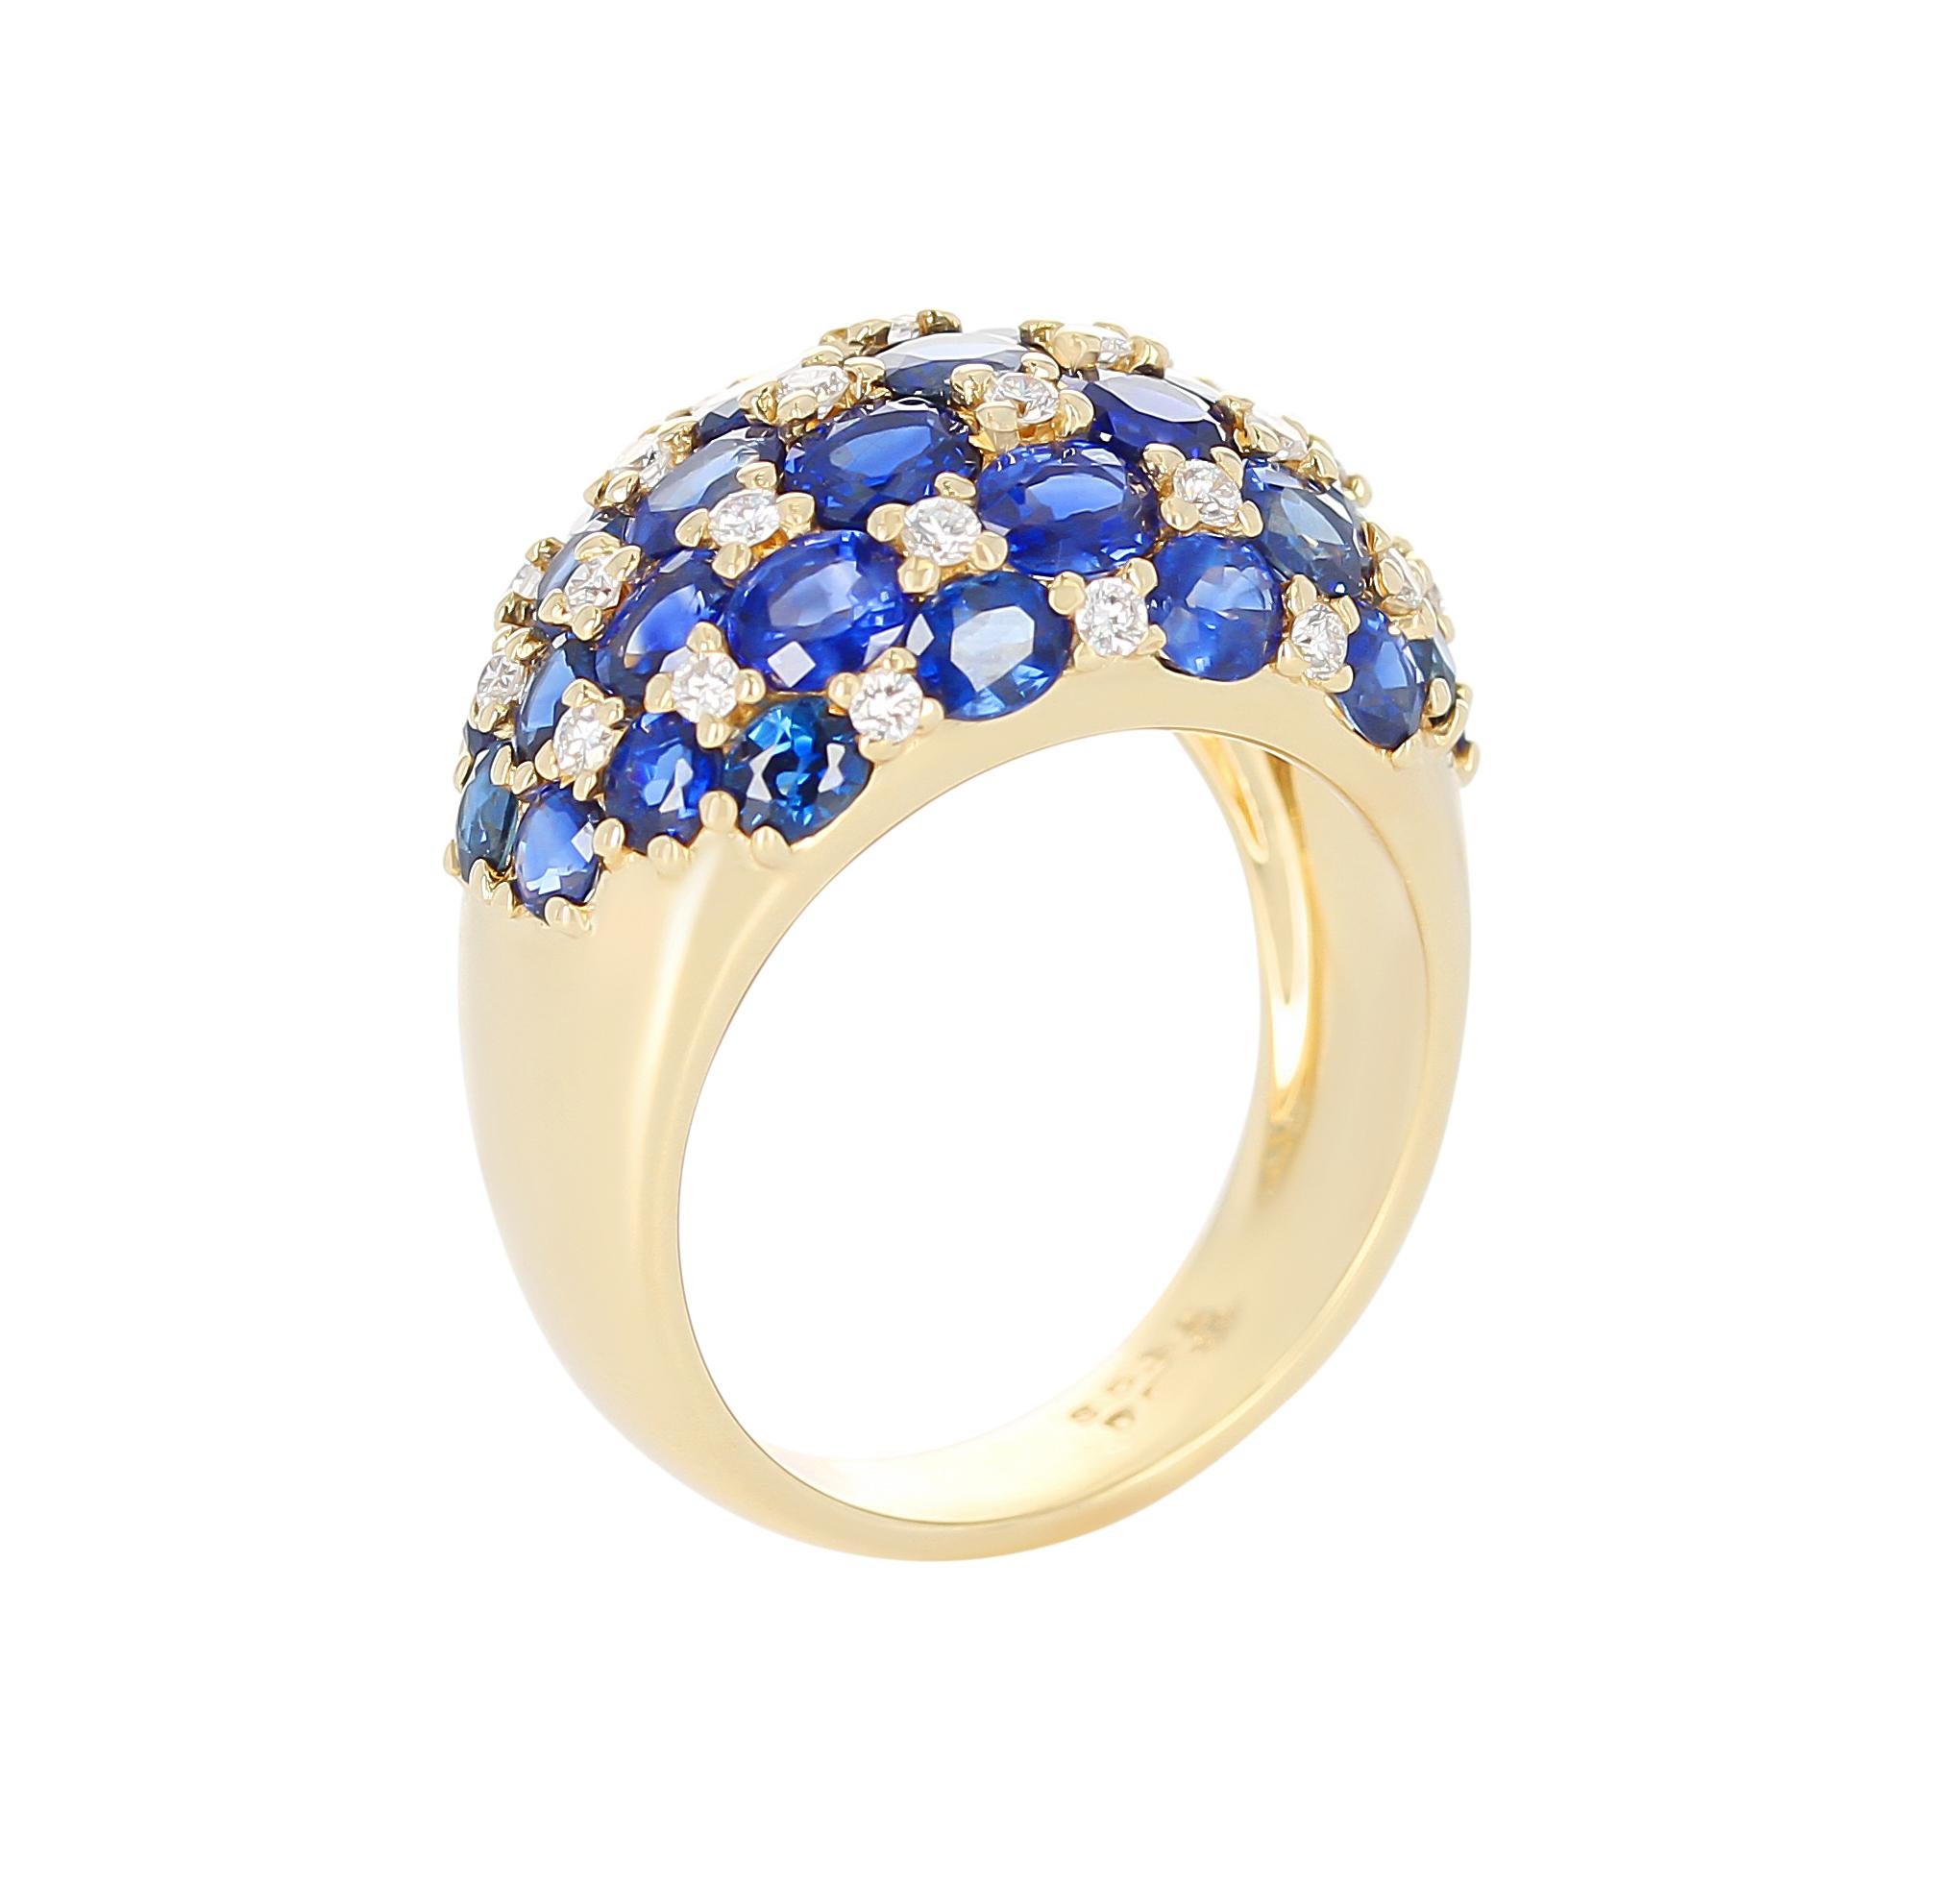 A checker-board Sapphire and Diamond Ring, with 4.82 carats of Sapphires, and 0.38 carats of Diamonds. The total weight is 8.78 grams, 18 Karat Yellow Gold, Ring Size US 6.50.